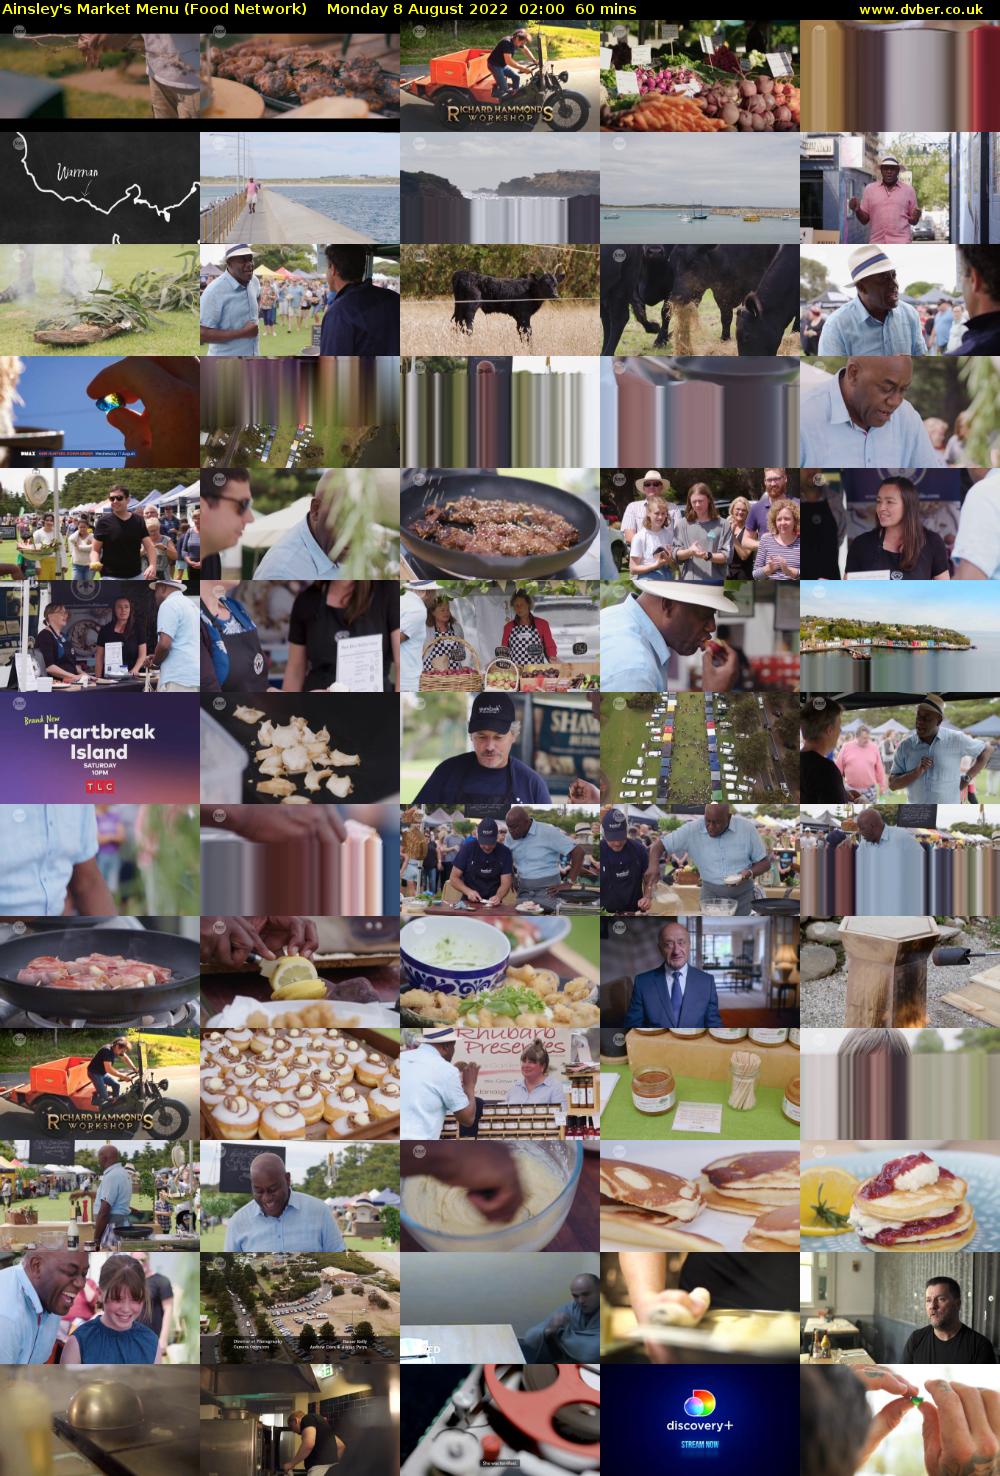 Ainsley's Market Menu (Food Network) Monday 8 August 2022 02:00 - 03:00